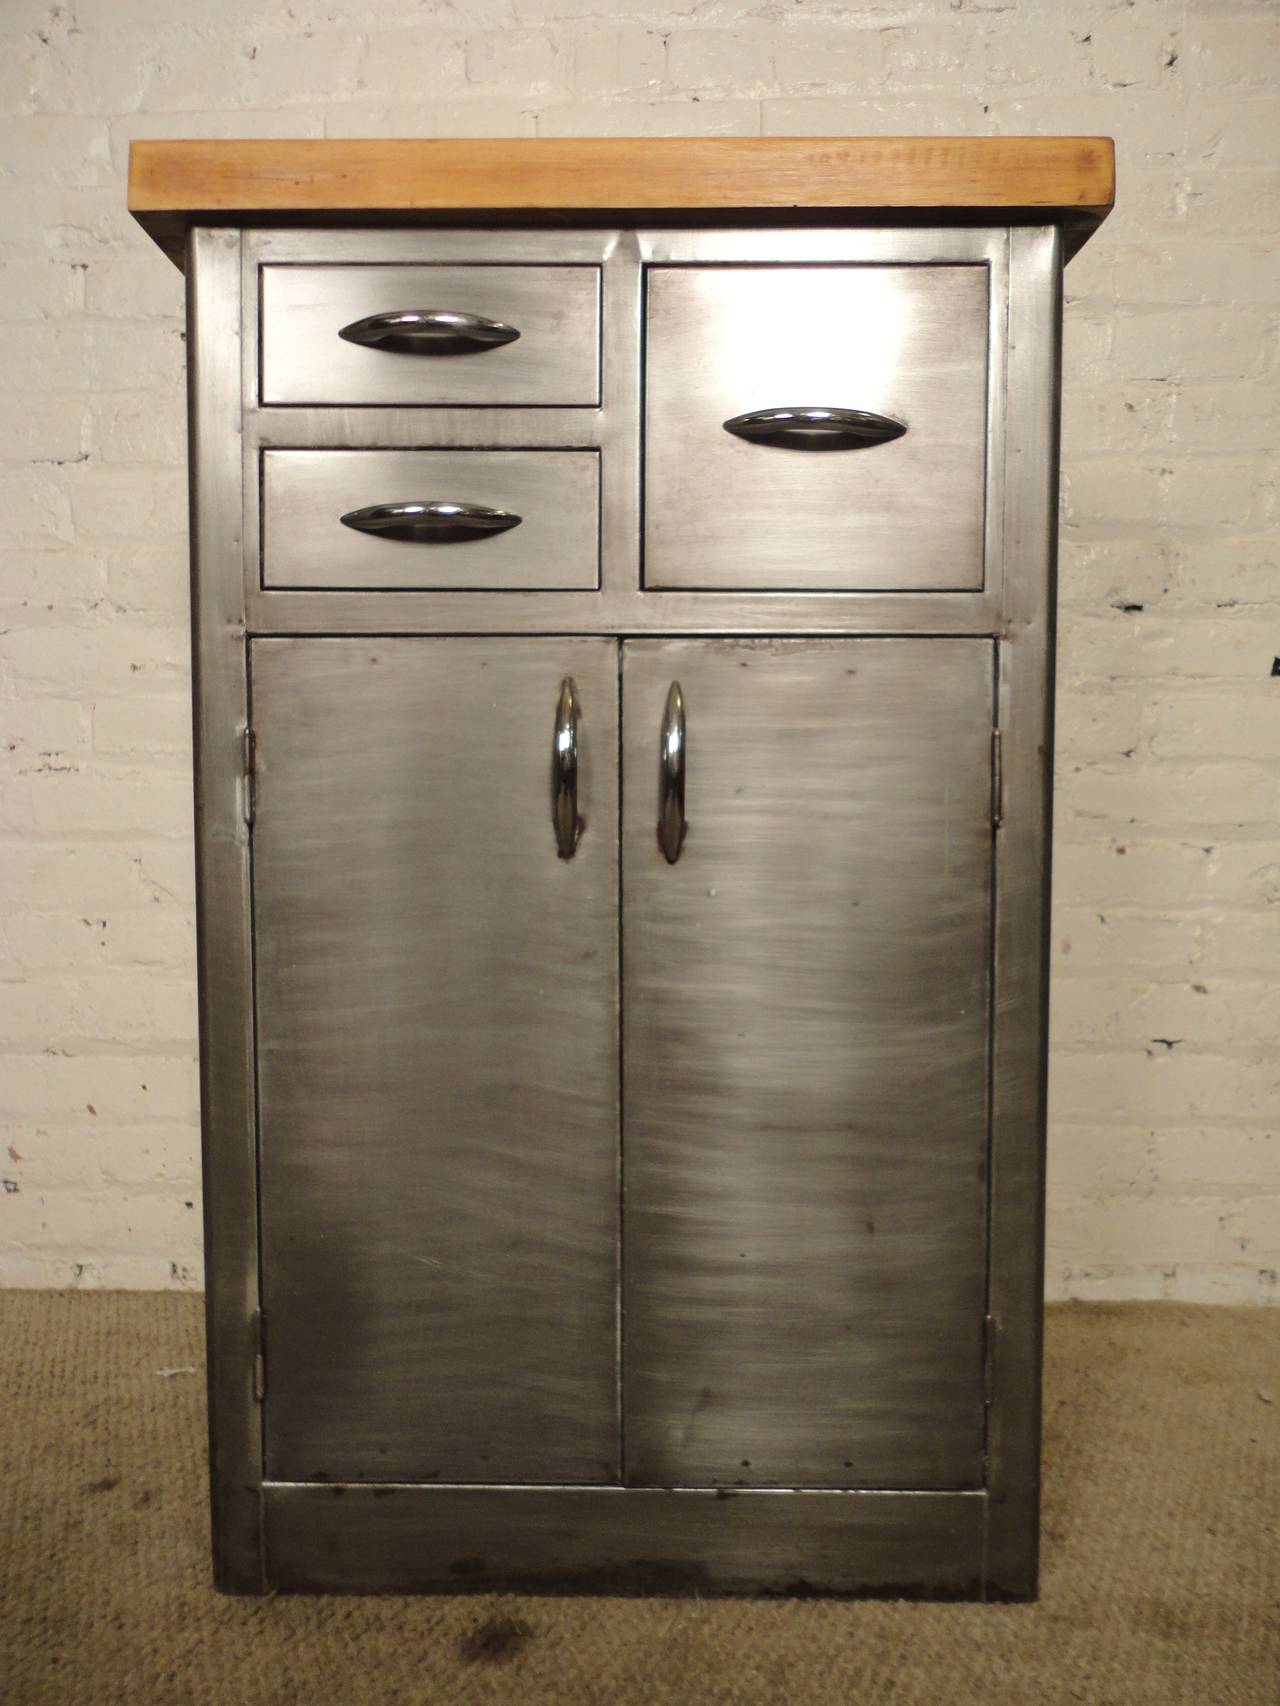 Cool metal cabinet with a thick wood block top. Stripped to a handsome bare metal look. Three drawers and double door cabinet. Great for kitchen or bathroom storage.

(Please confirm item location - NY or NJ - with dealer)